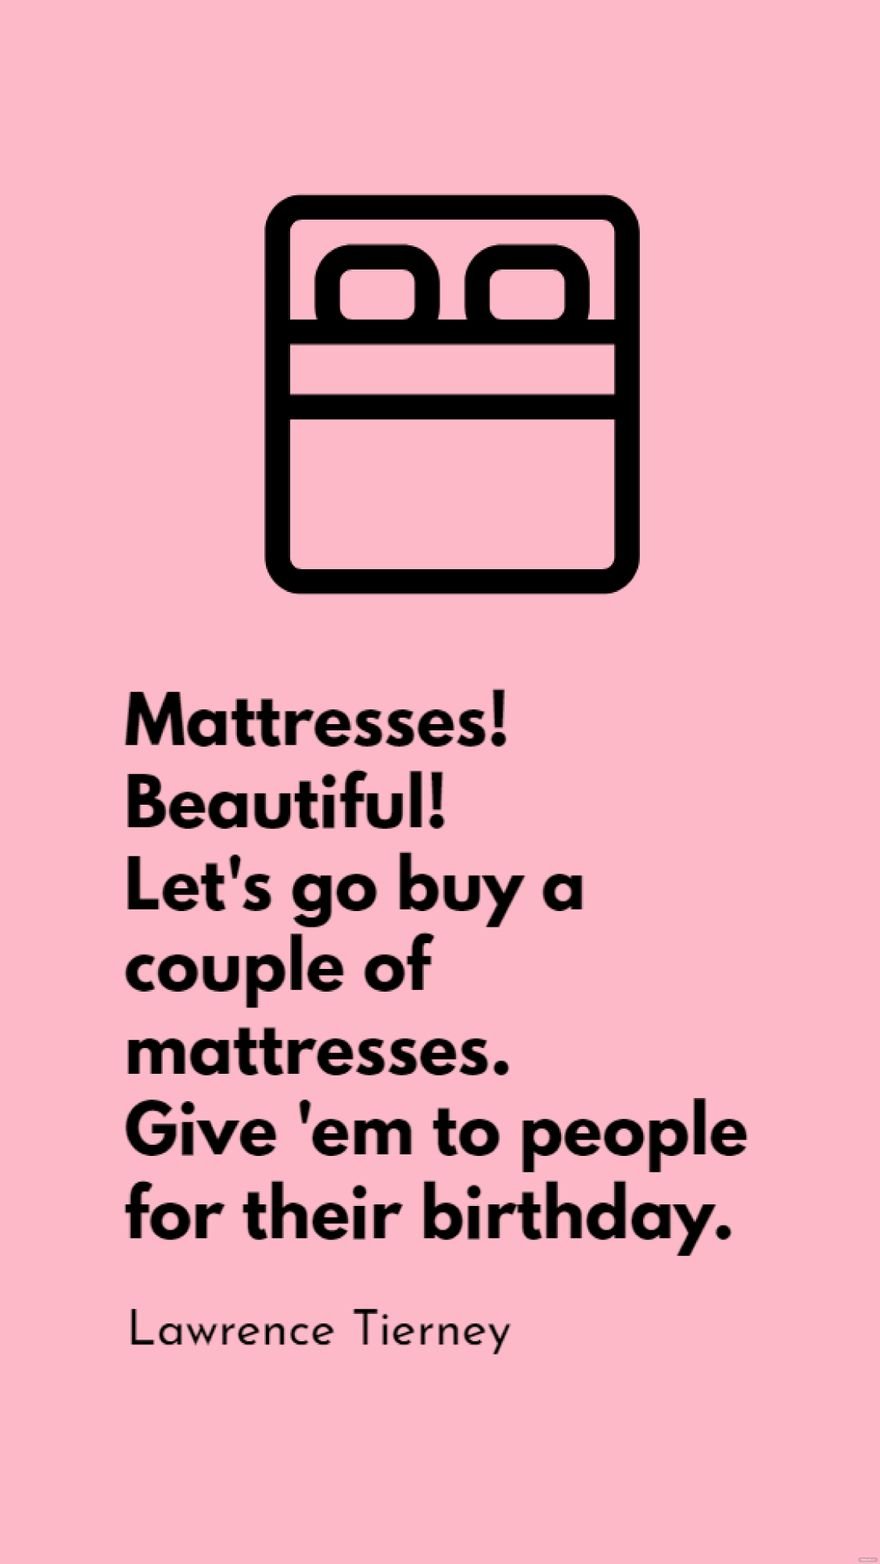 Free Lawrence Tierney - Mattresses! Beautiful! Let's go buy a couple of mattresses. Give 'em to people for their birthday. in JPG